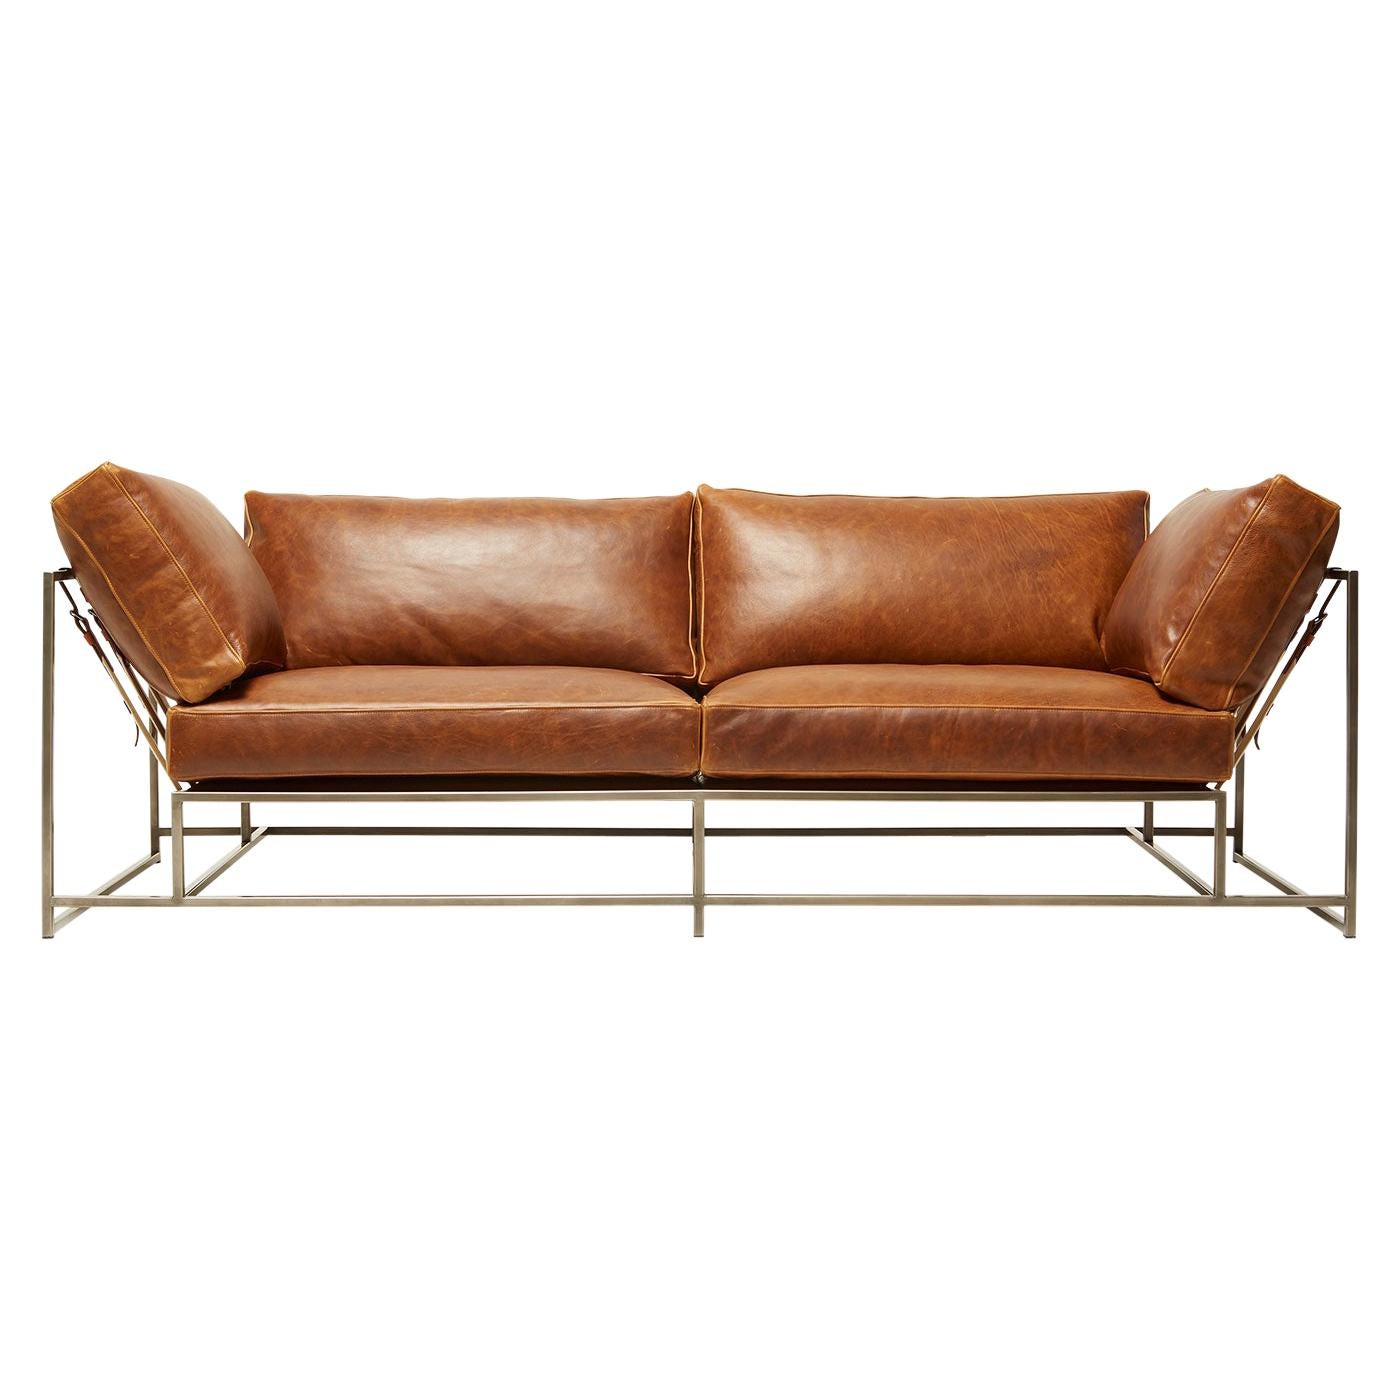 Potomac Leather and Antique Nickel Two-Seat Sofa with Off-White Belting